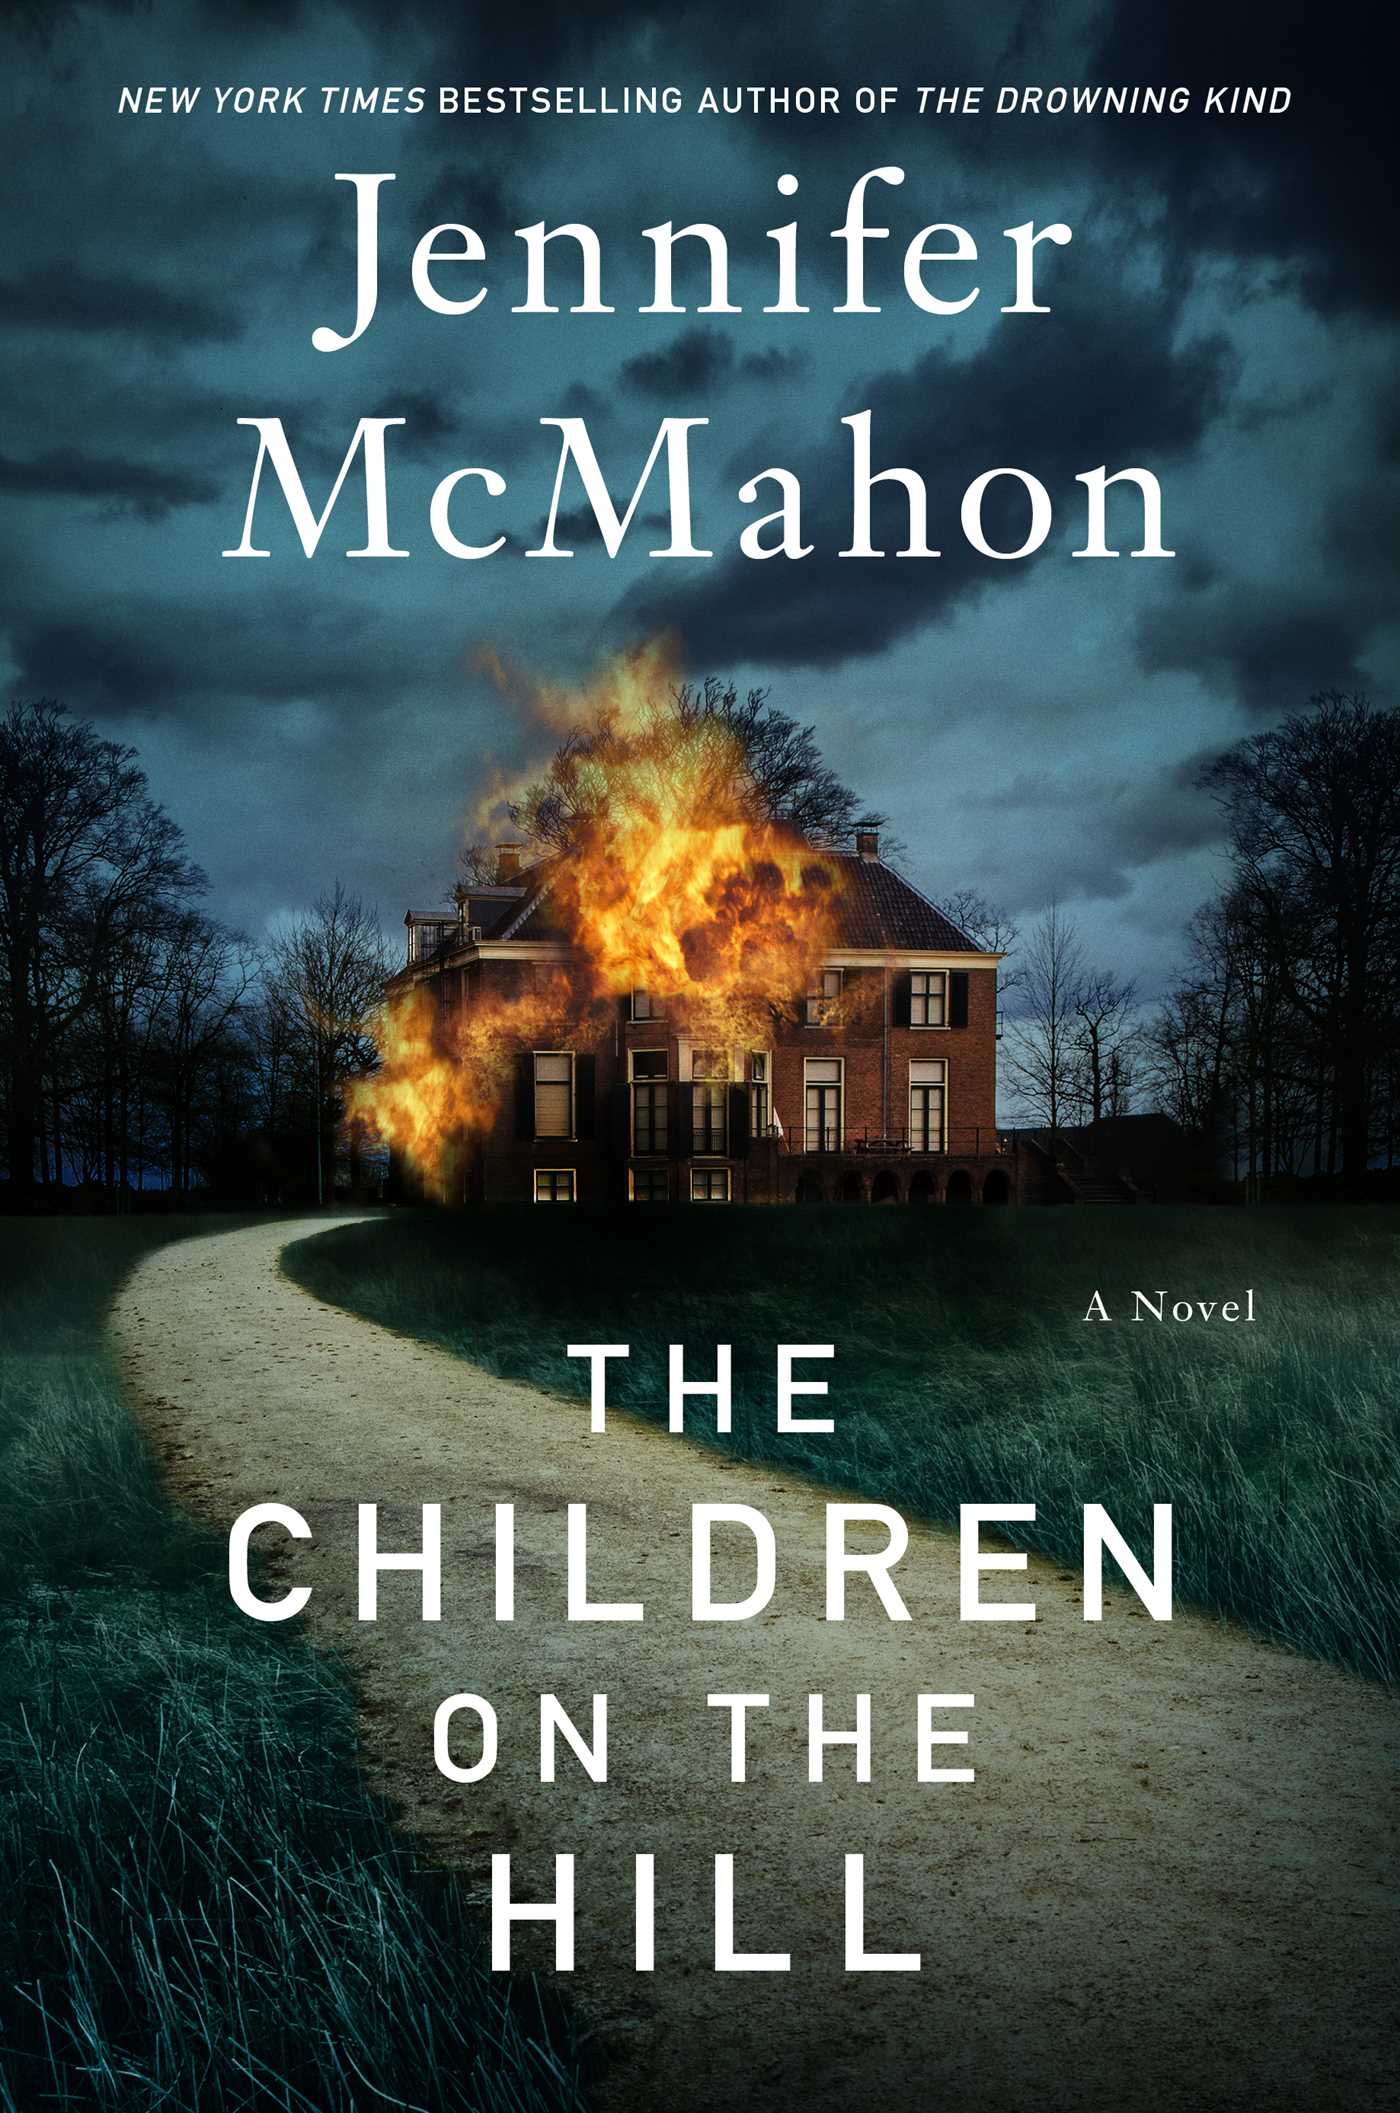 The Children on the Hill by Jennifer McMahon Free Download